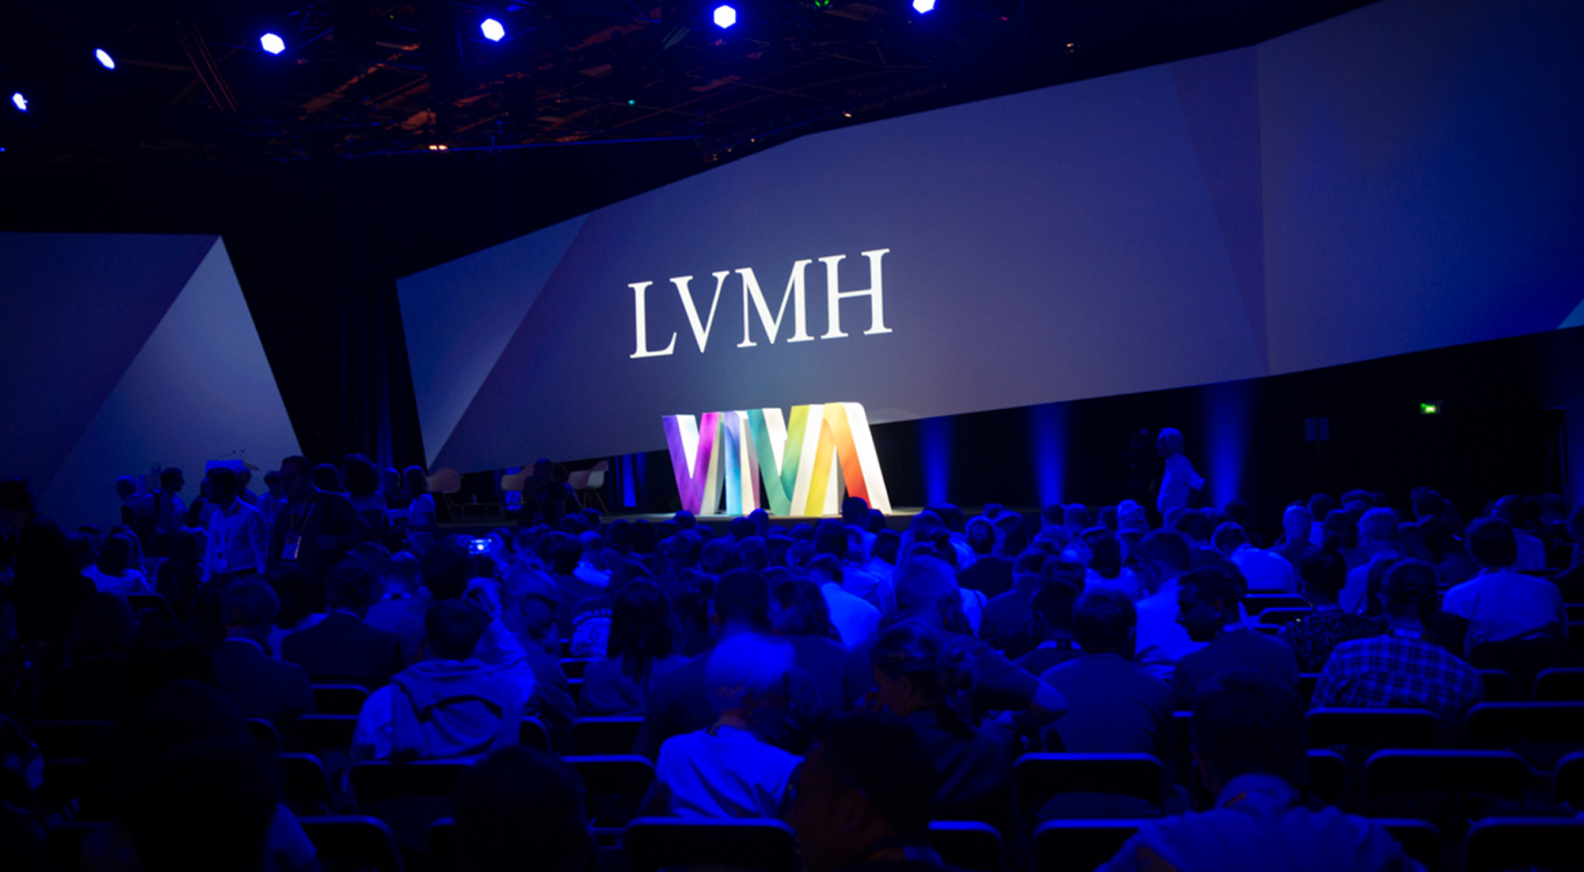 Three start-ups specializing in data and artificial intelligence are  finalists for the LVMH Innovation Award - ActuIA